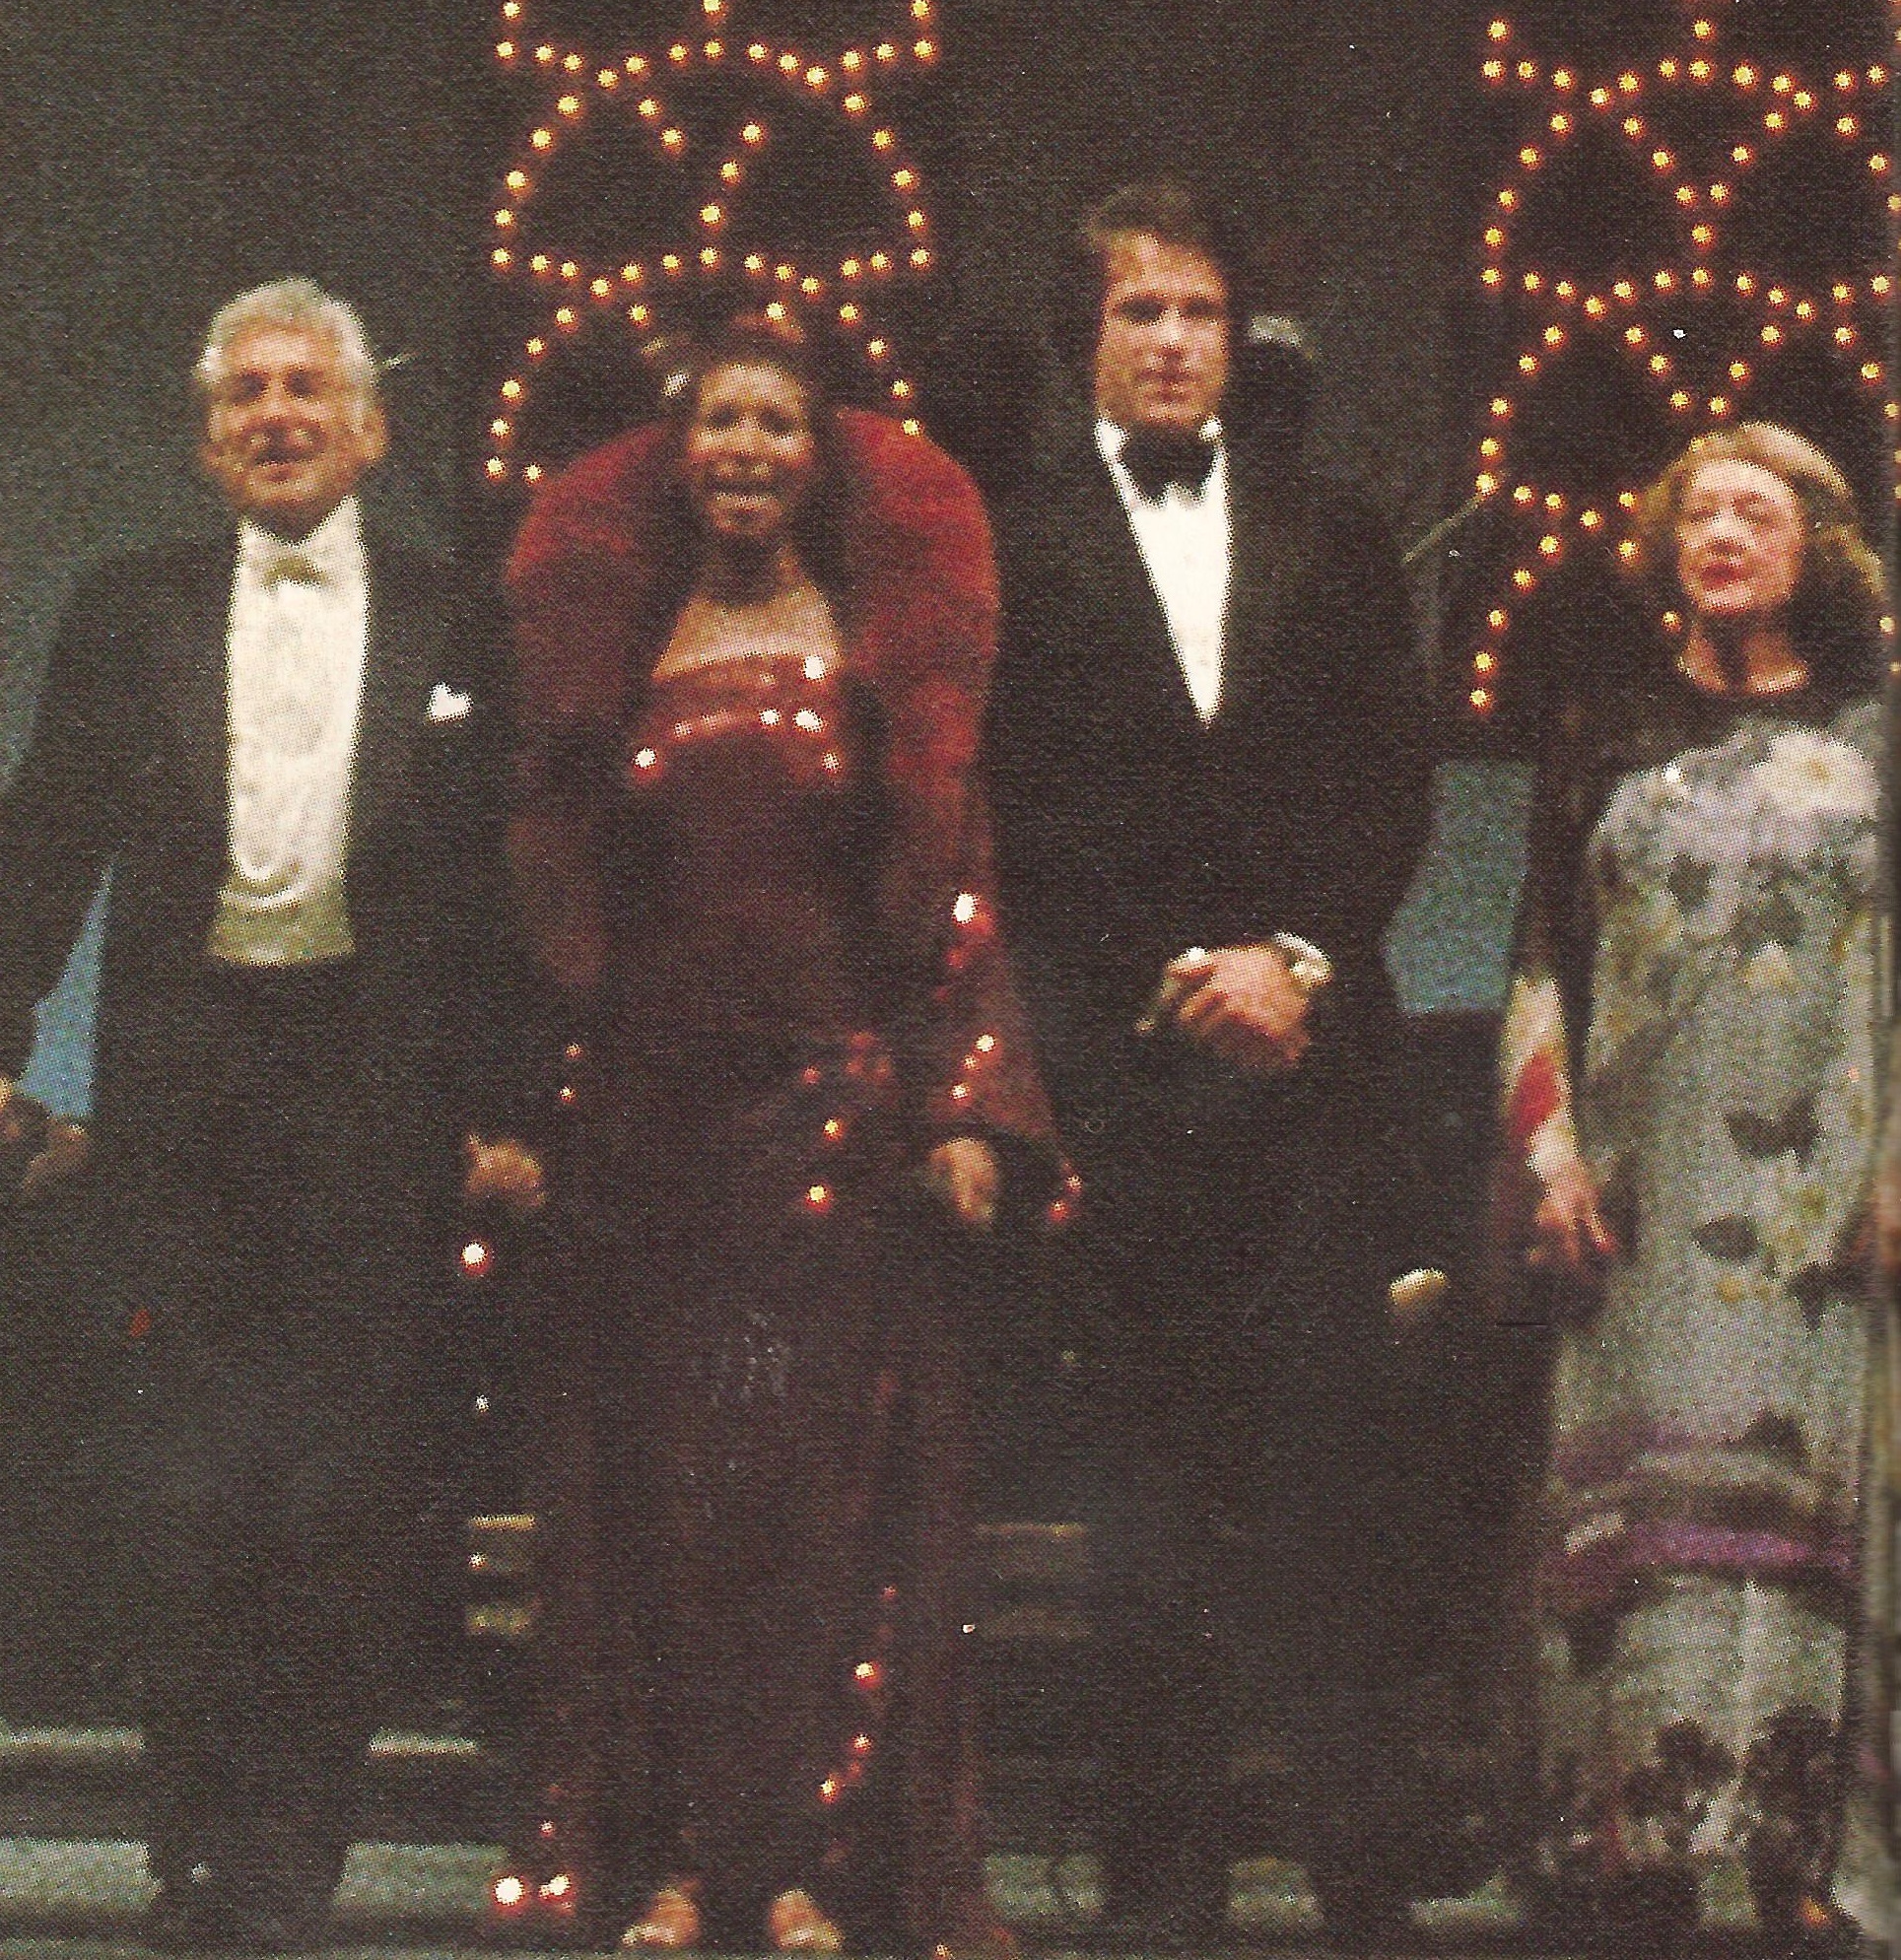 Leonard Bernstein, Aretha Franklin, Warren Beatty and Bette Davis were but four of the headliners who performed at the gala in the Kennedy Center.